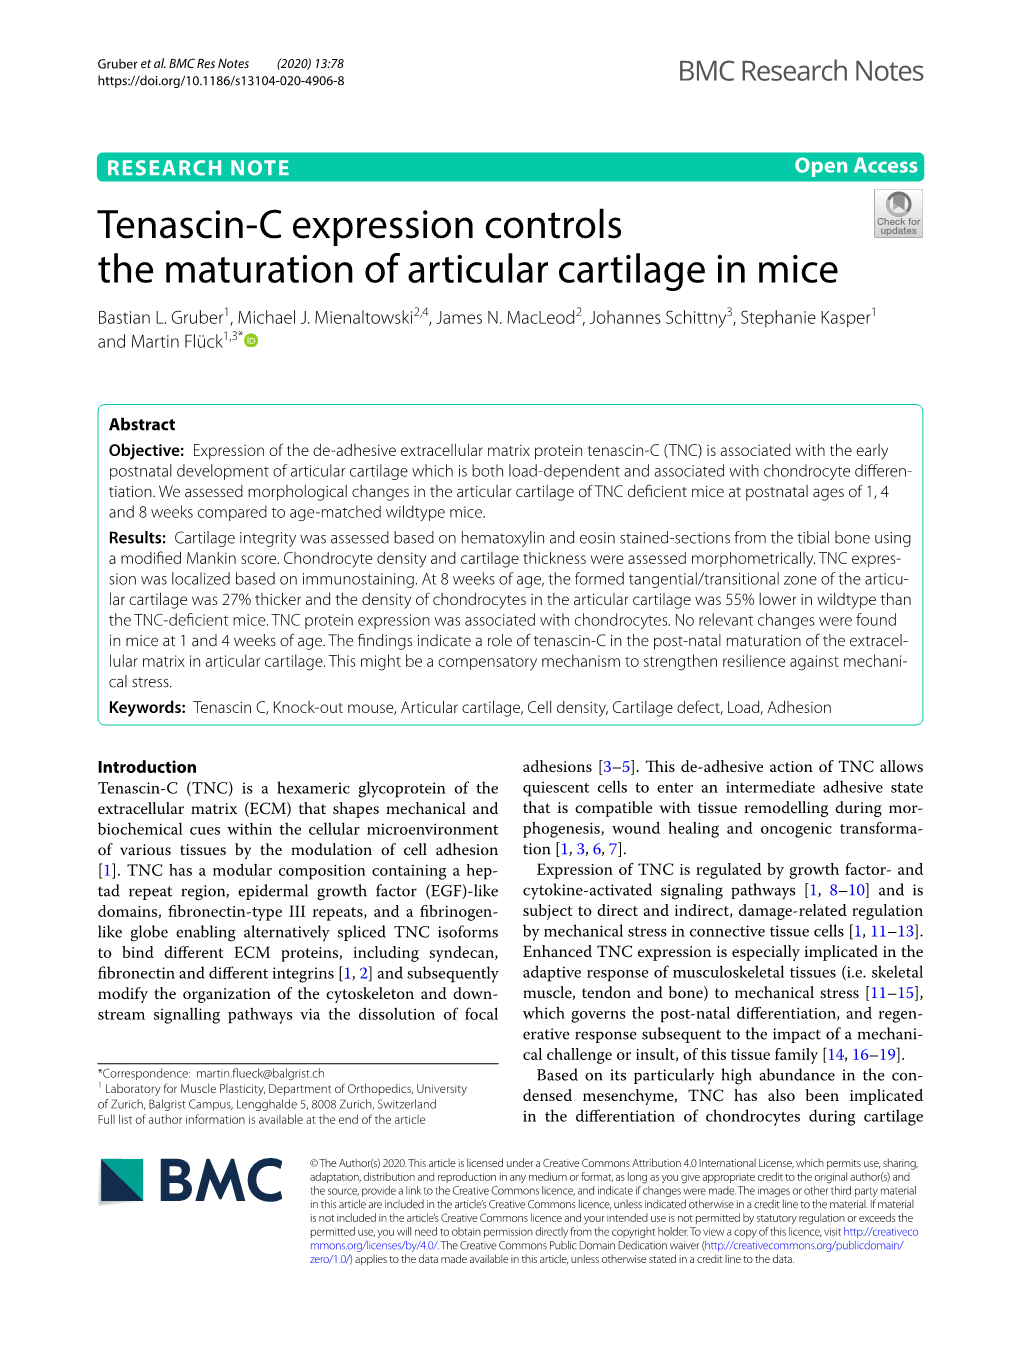 Tenascin-C Expression Controls the Maturation of Articular Cartilage In